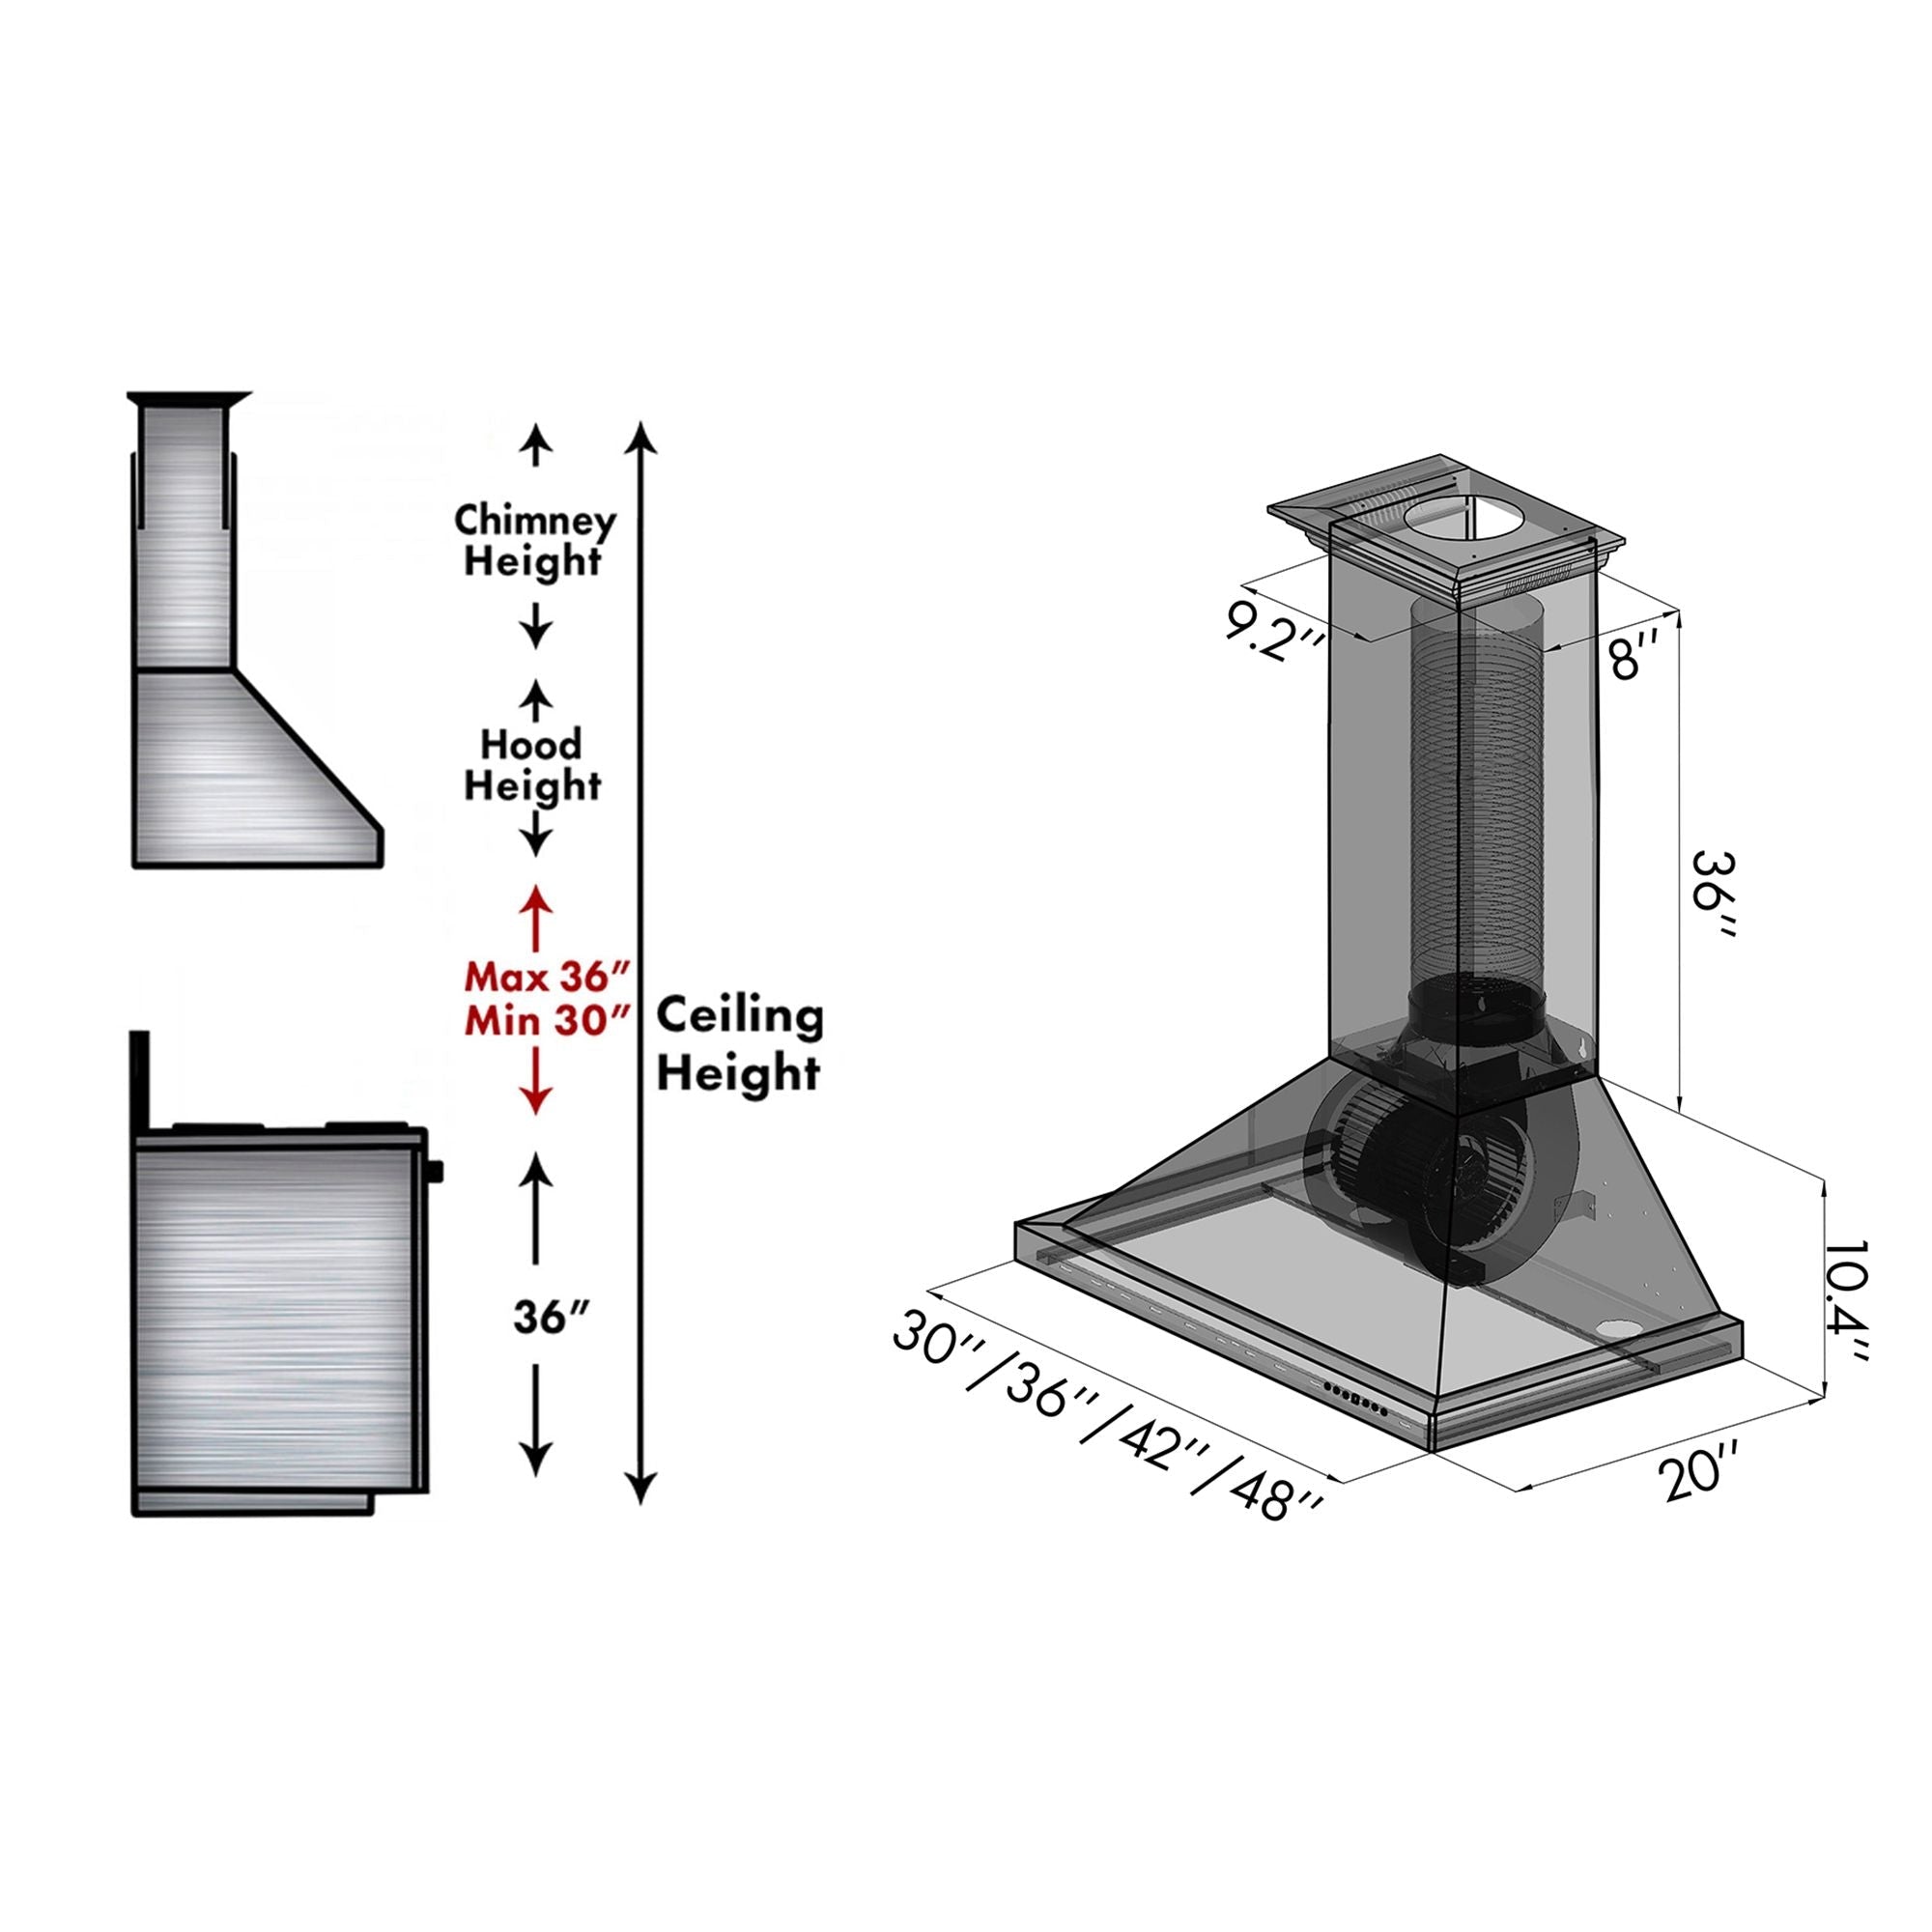 ZLINE Designer Series 7-Layer Copper Wall Mount Range Hood (8KBC) chimney height guide and dimensions.